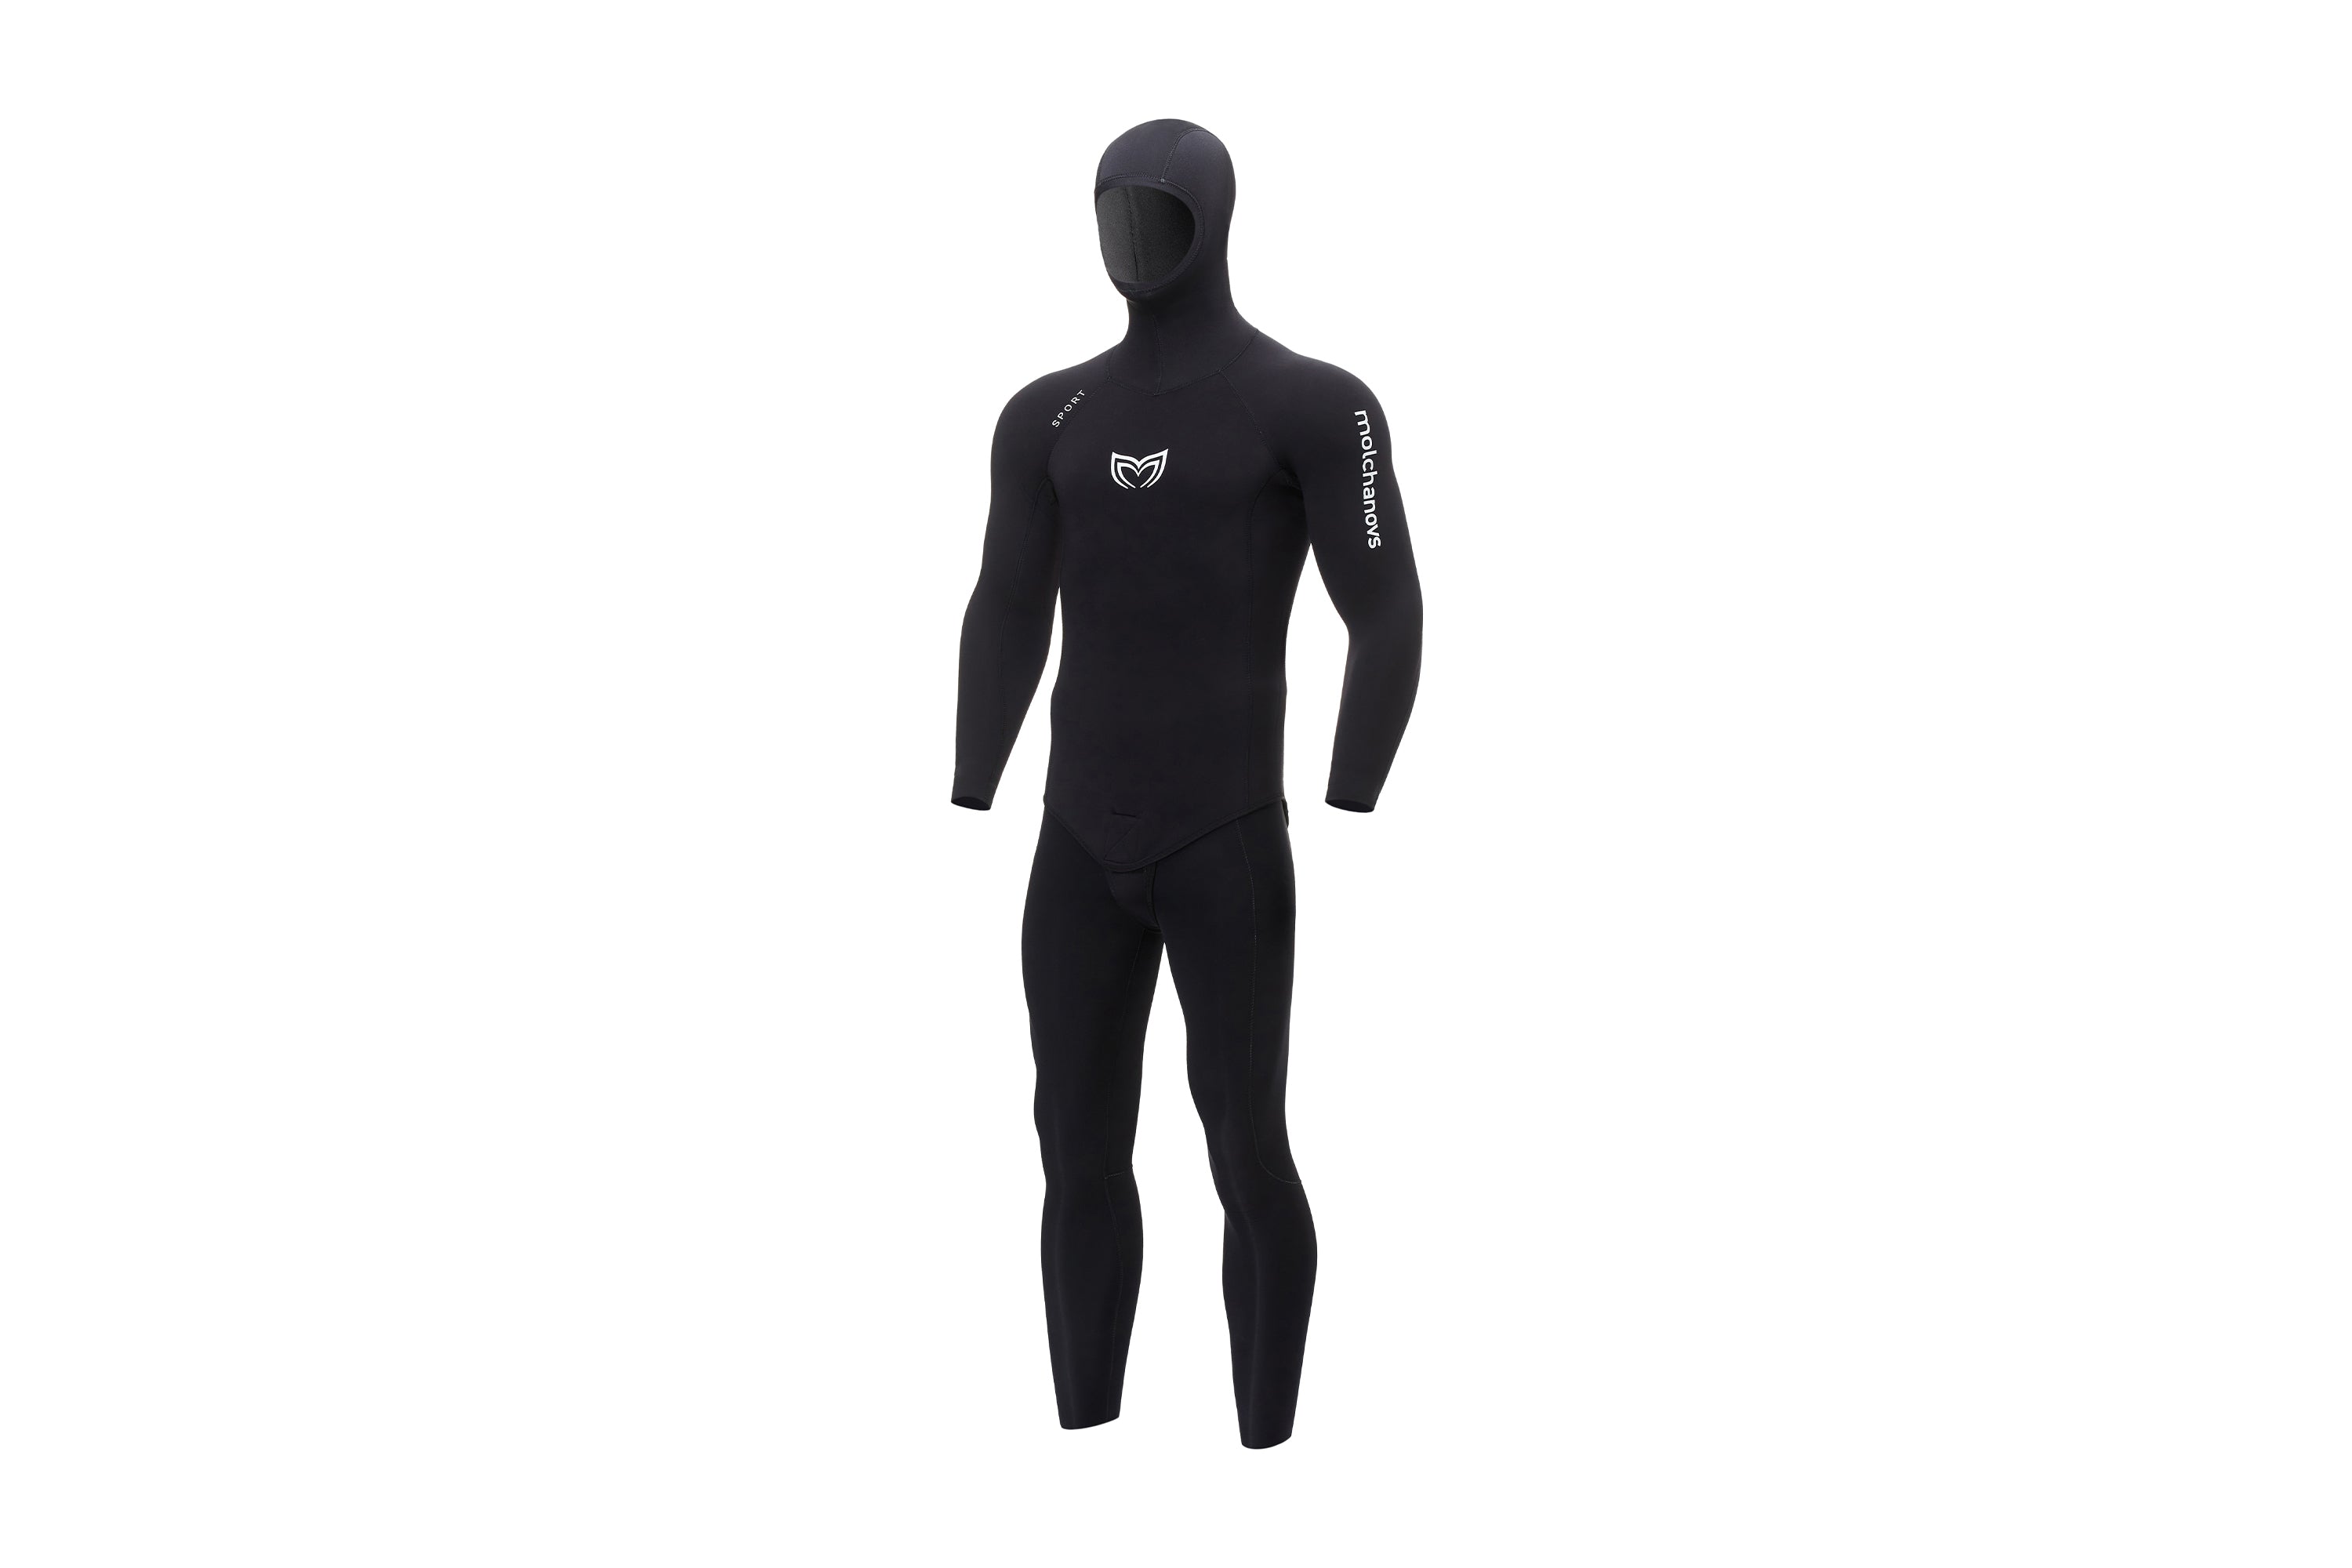 REALON Wetsuit Men 3mm Full 5mm Cold Water Surfing Snorkeling Diving  Swimming Shorty Wet Suit (3mm Shorty Black, Large), Wetsuits -  Canada